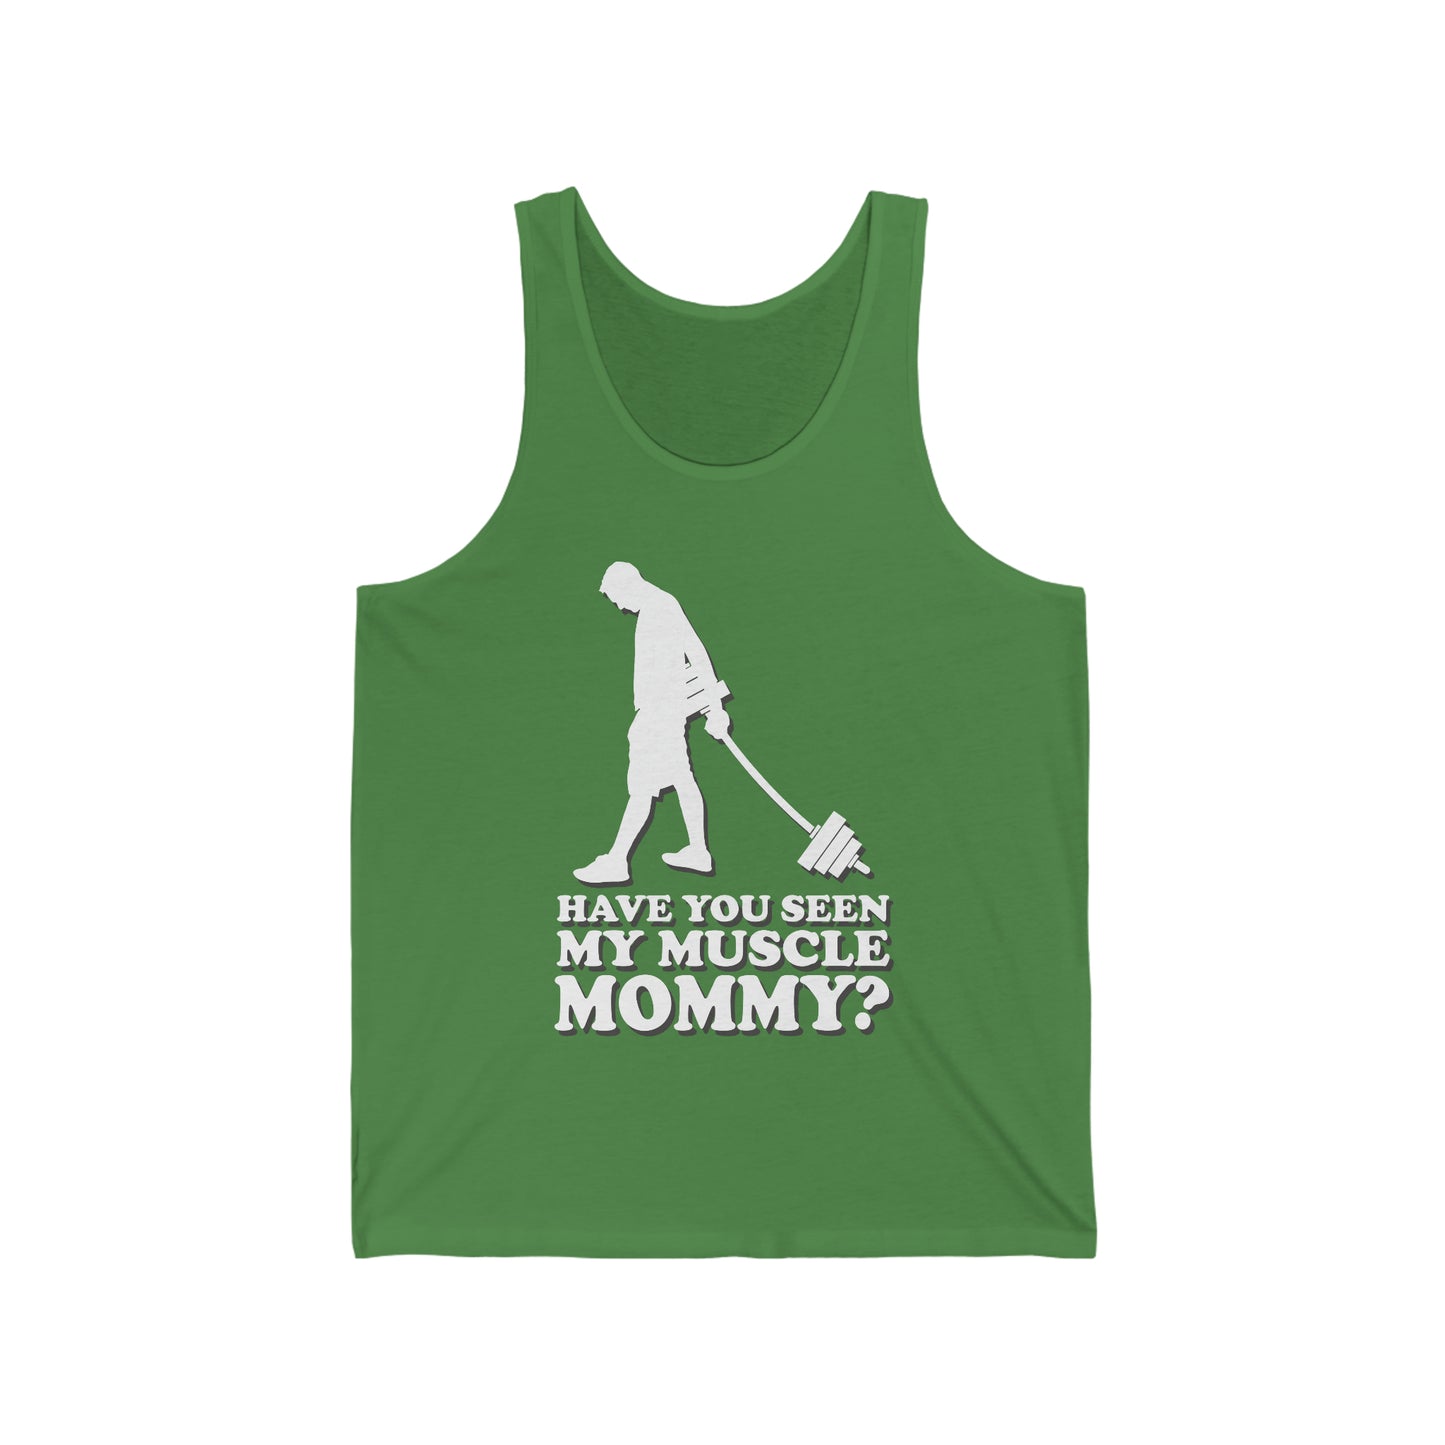 Have You Seen My Muscle Mommy? - Unisex Jersey Tank